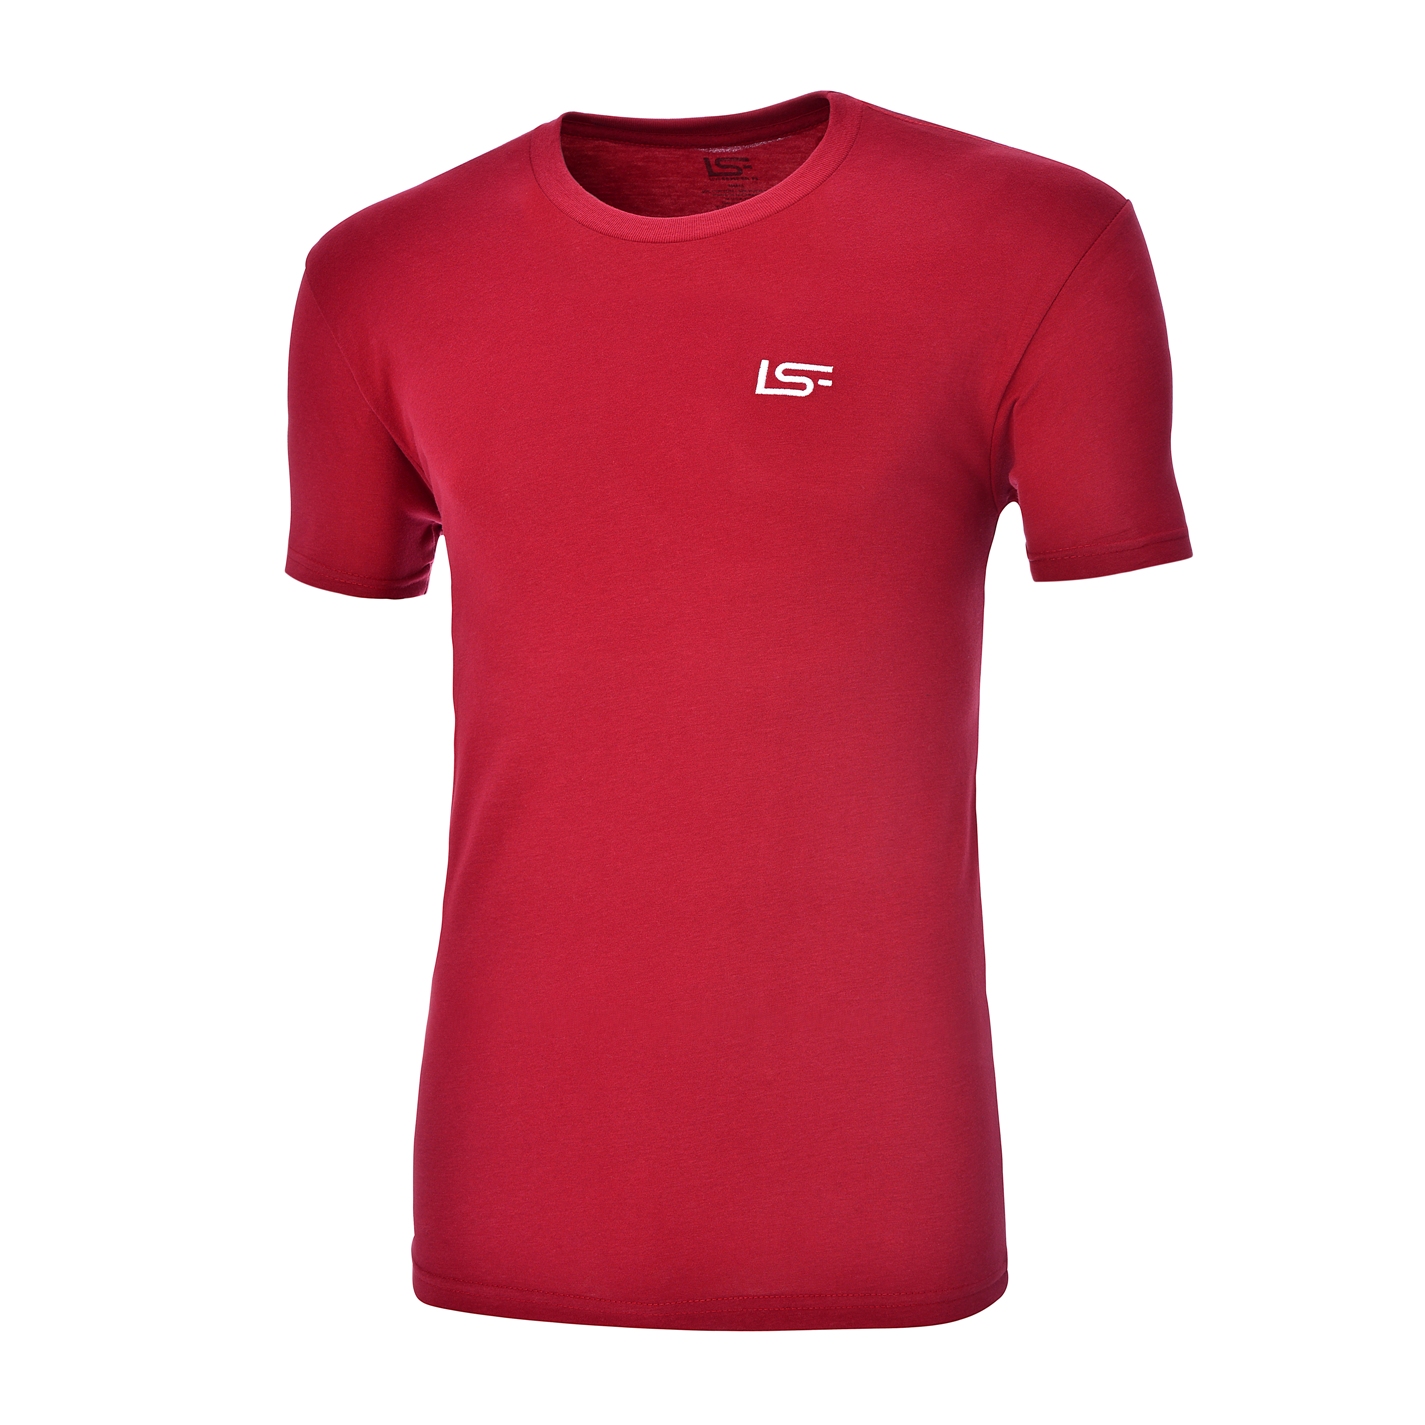 LSF Logo Fitted Tee - Cardinal Red - LIVESEMPER FI